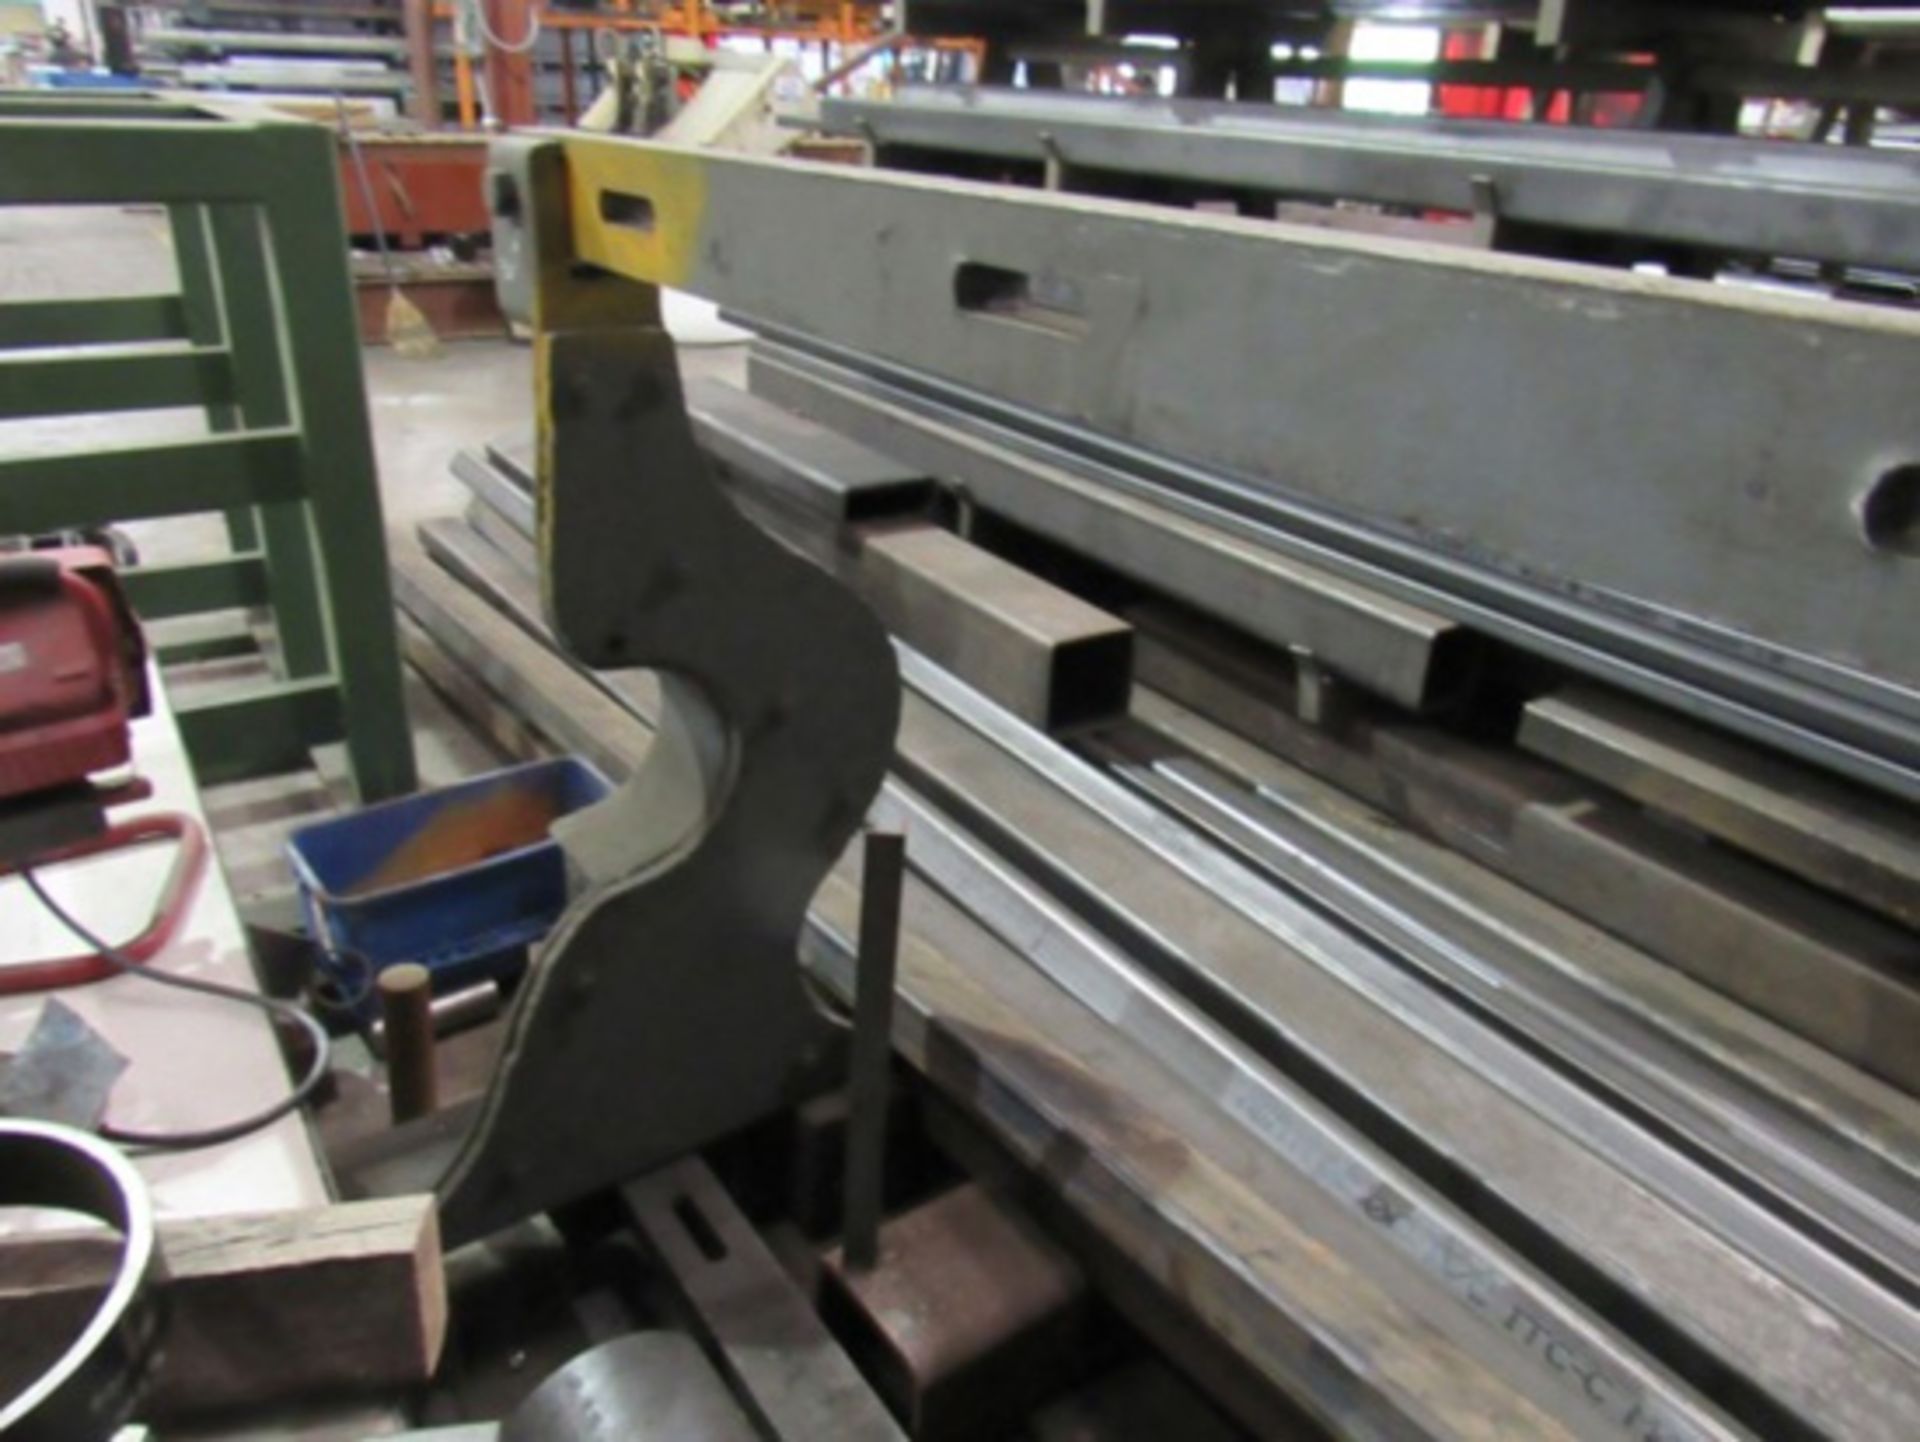 Rogers Hydraulic Wheel Press, 100 Ton x 120", Mdl: 2877 - Painesville, OH - 8097P - Image 3 of 7